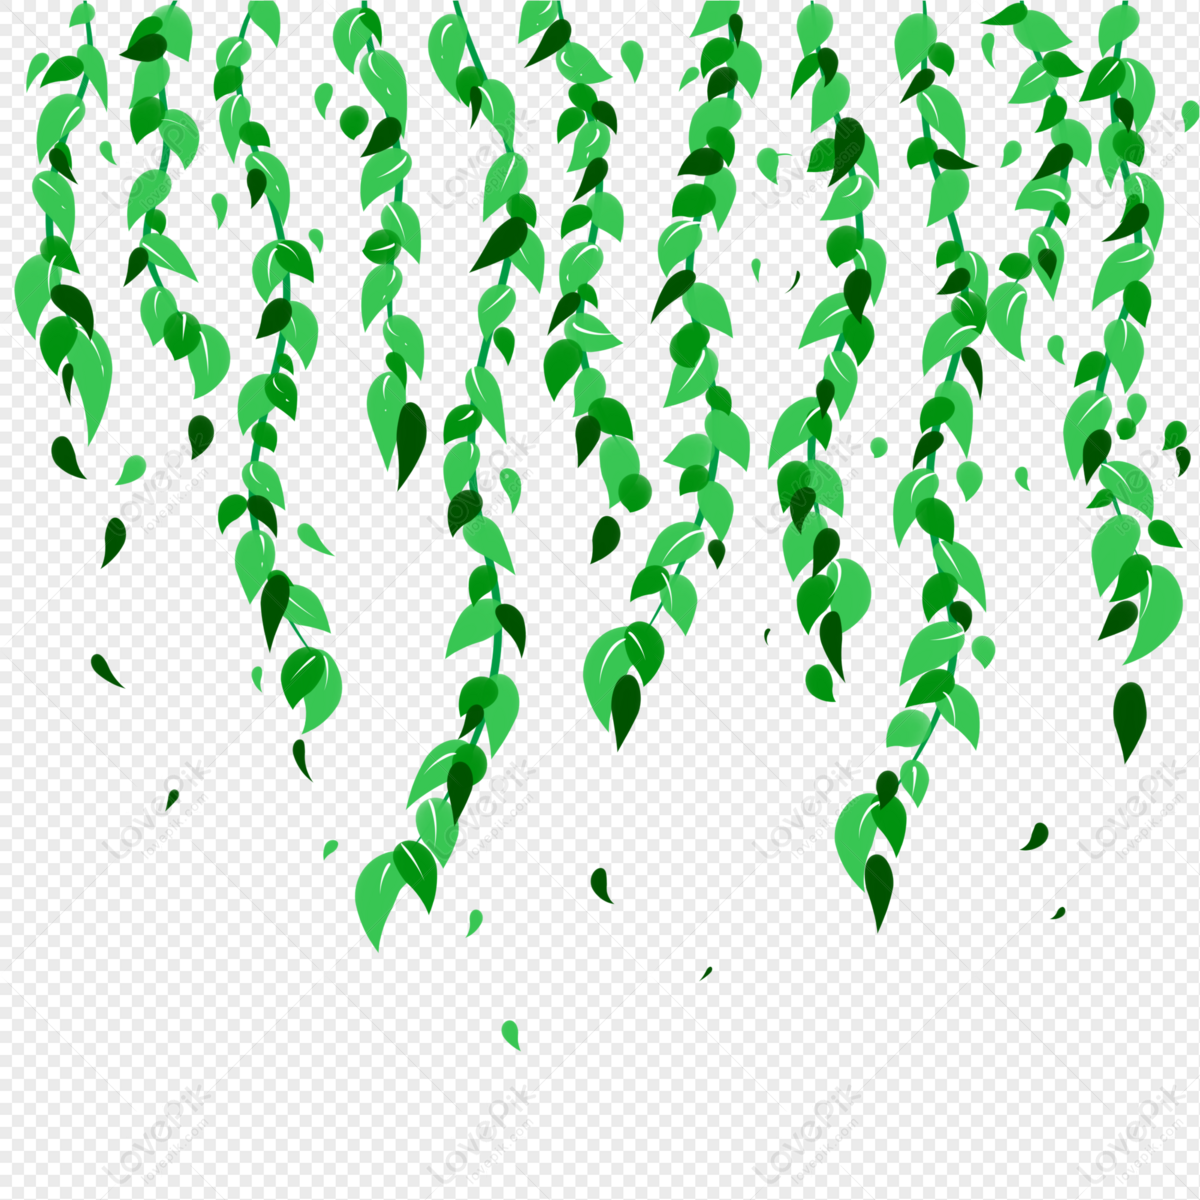 Cartoon Green Vine Wall PNG Transparent Image And Clipart Image For Free  Download - Lovepik | 401272157